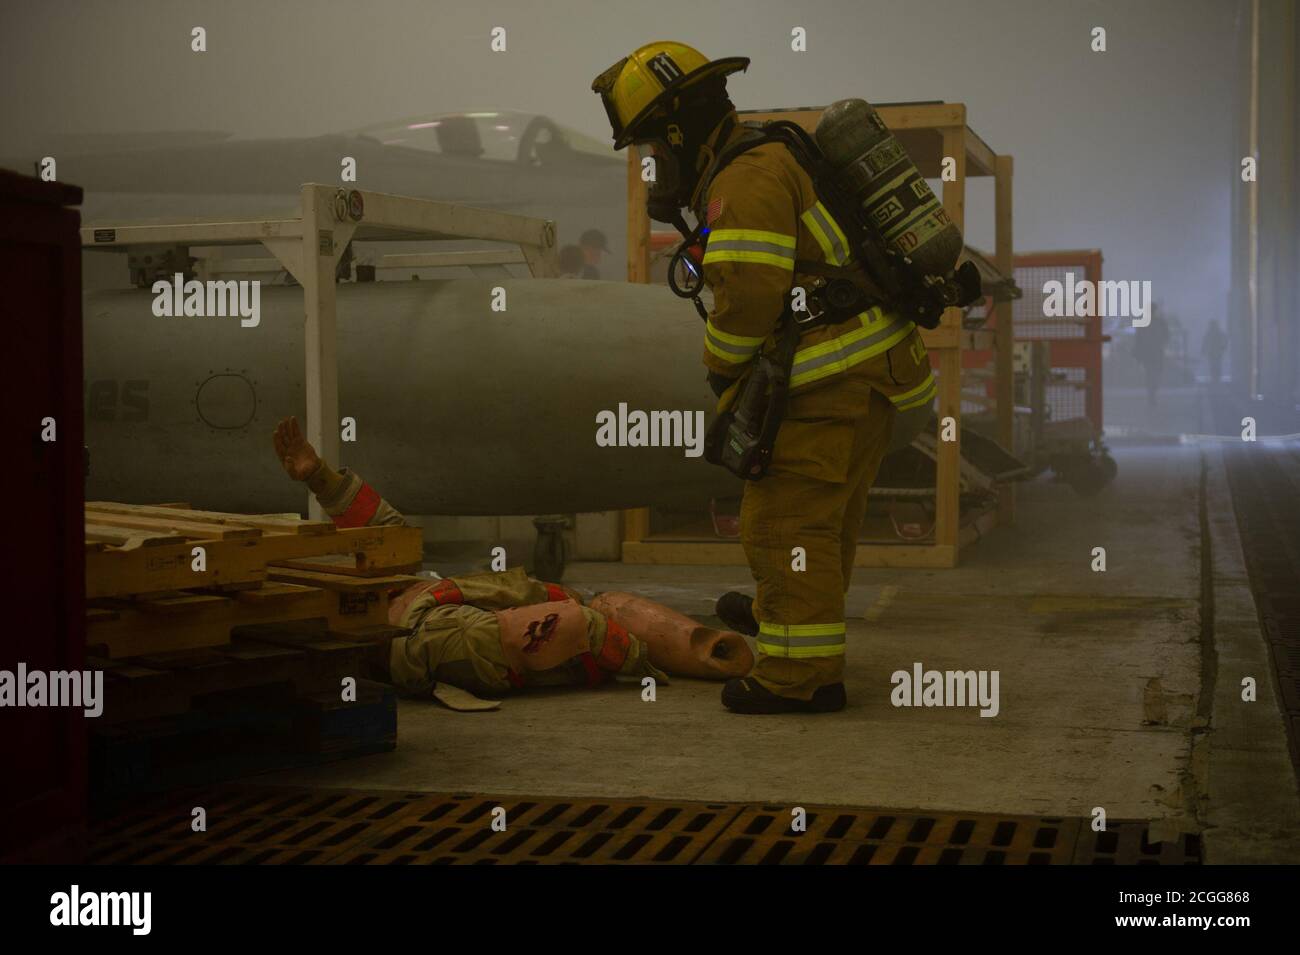 VIRGINIA BEACH, Va. (Sept. 9, 2020) A firefighter assigned to Navy Region Mid-Atlantic Fire & Emergency Services prepares to tend to a simulated casualty during an emergency training exercise inside a hangar on board Naval Air Station Oceana. The goal of the exercise was to enhance the readiness of response teams and maintain interoperability between Navy leadership and the City of Virginia Beach. (U.S. Navy photo by Aviation Ordnanceman 2nd Class Benjamin Perrigo/Released) Stock Photo